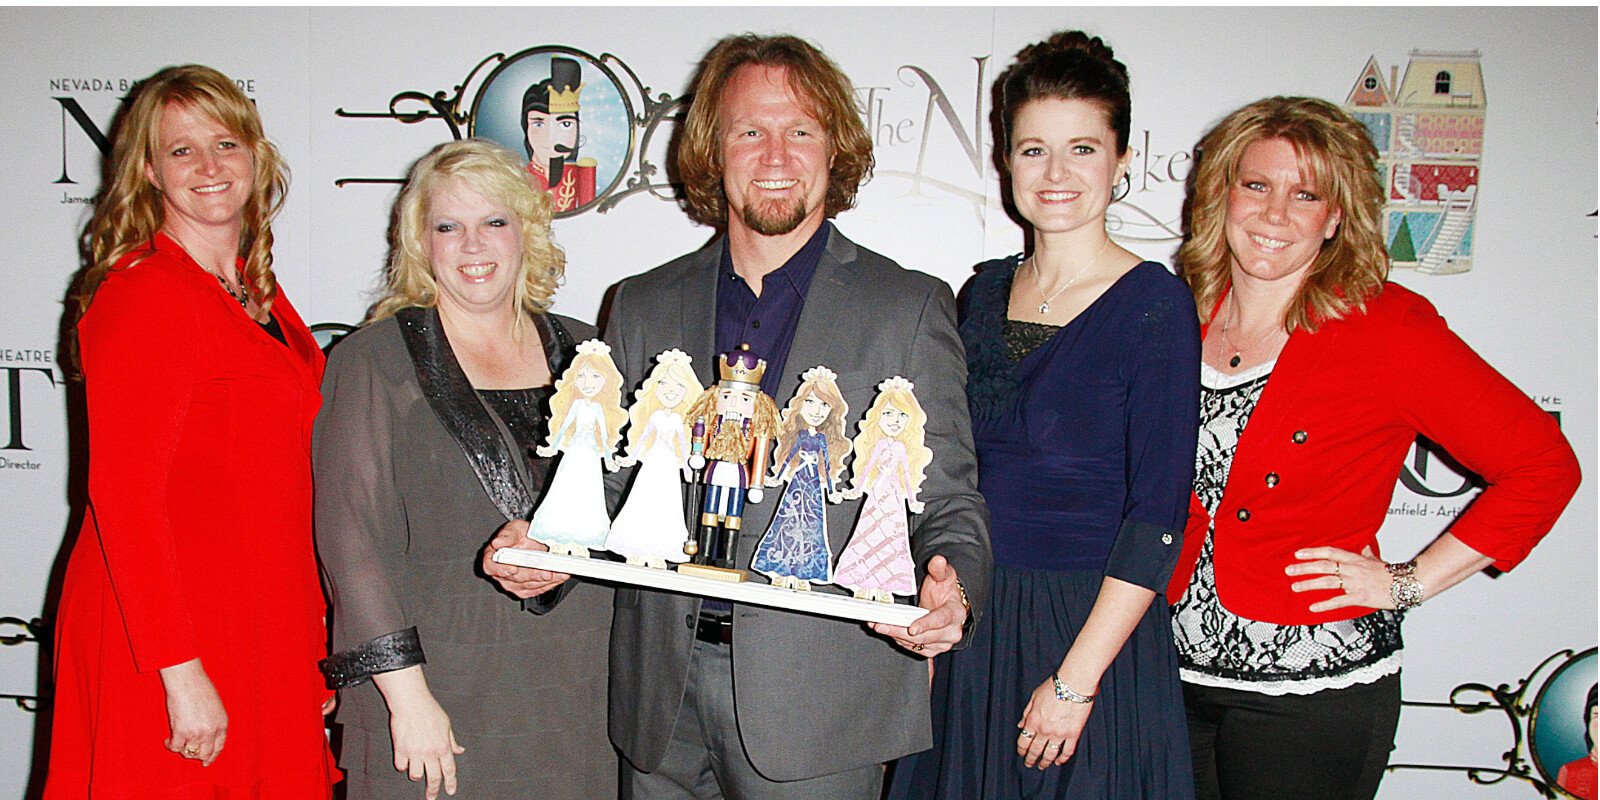 Christine, Janelle, Kody, Robyn, and Meri Brown from TLC's 'Sister Wives' pictured in 2012.